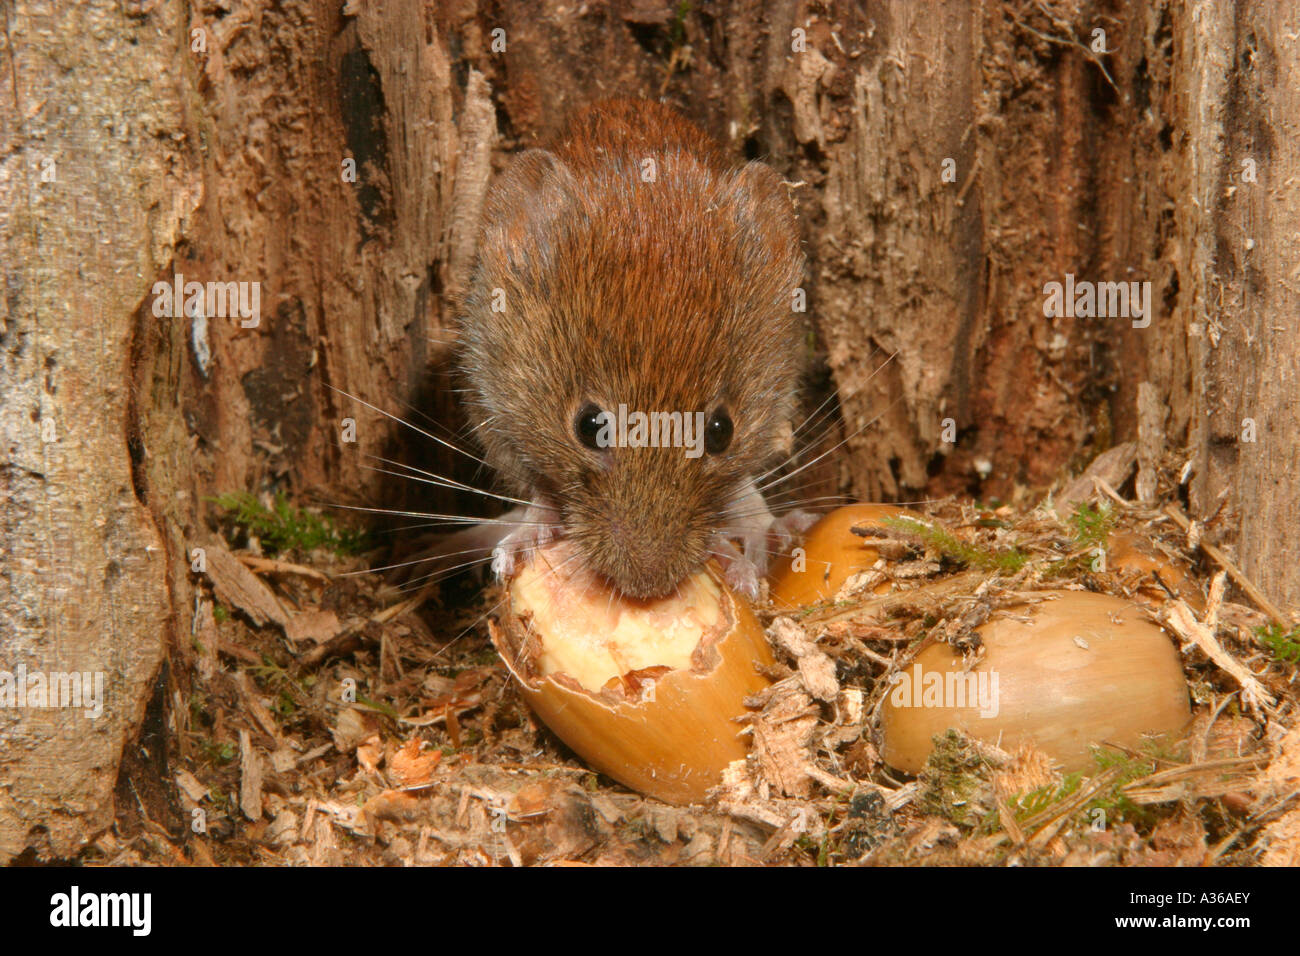 BANK VOLE CLETHRIONOMYS GLAREOLUS EATING ACORN IN HOLLOW IN TREE 044074 Stock Photo